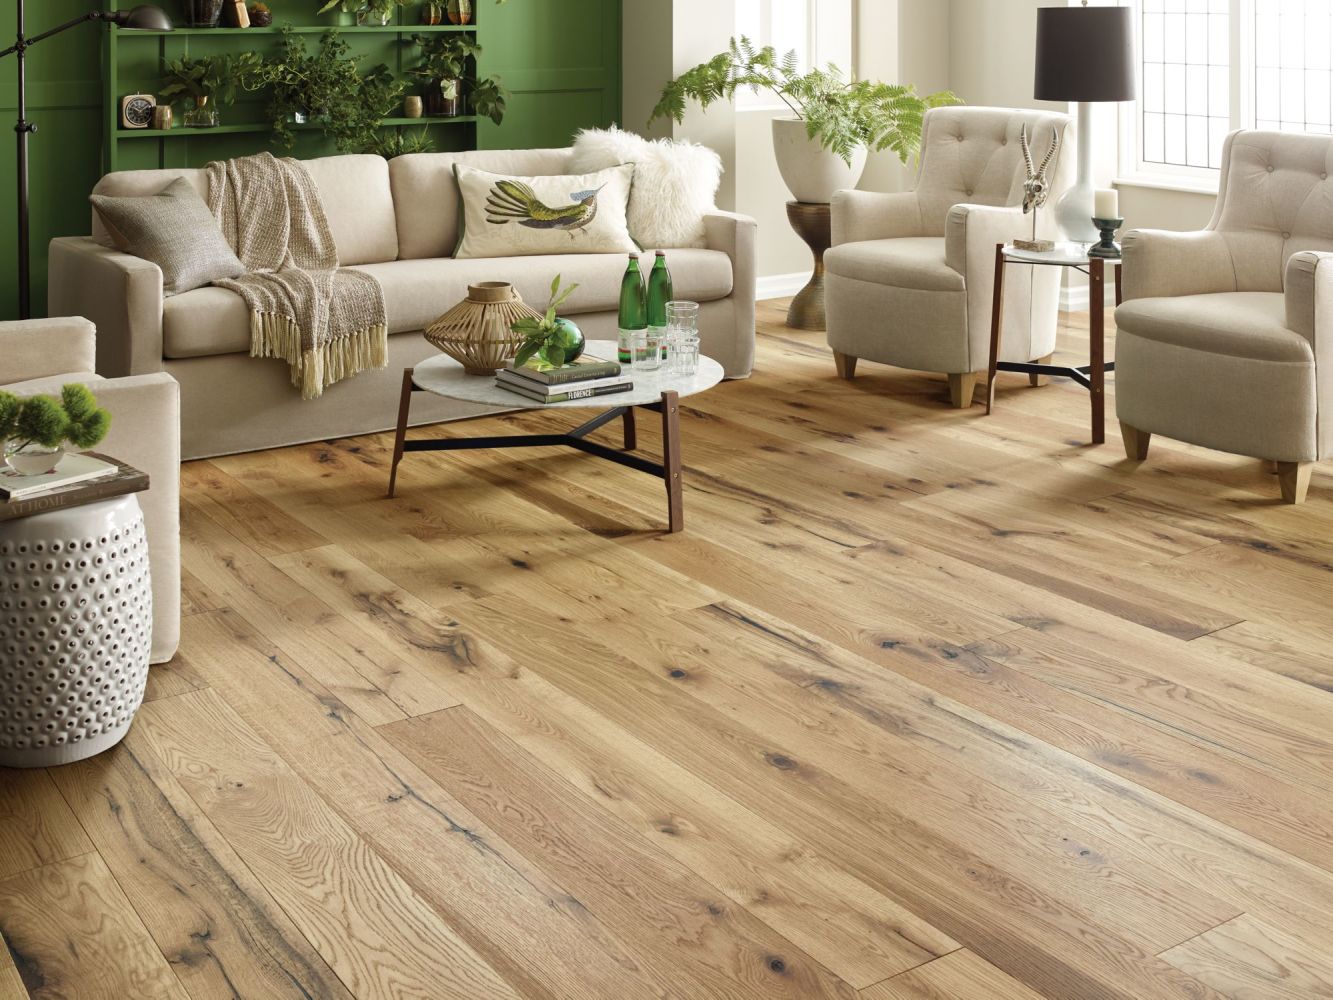 Shaw Floors Repel Hardwood Reflections White Oak Natural 01079_SW661